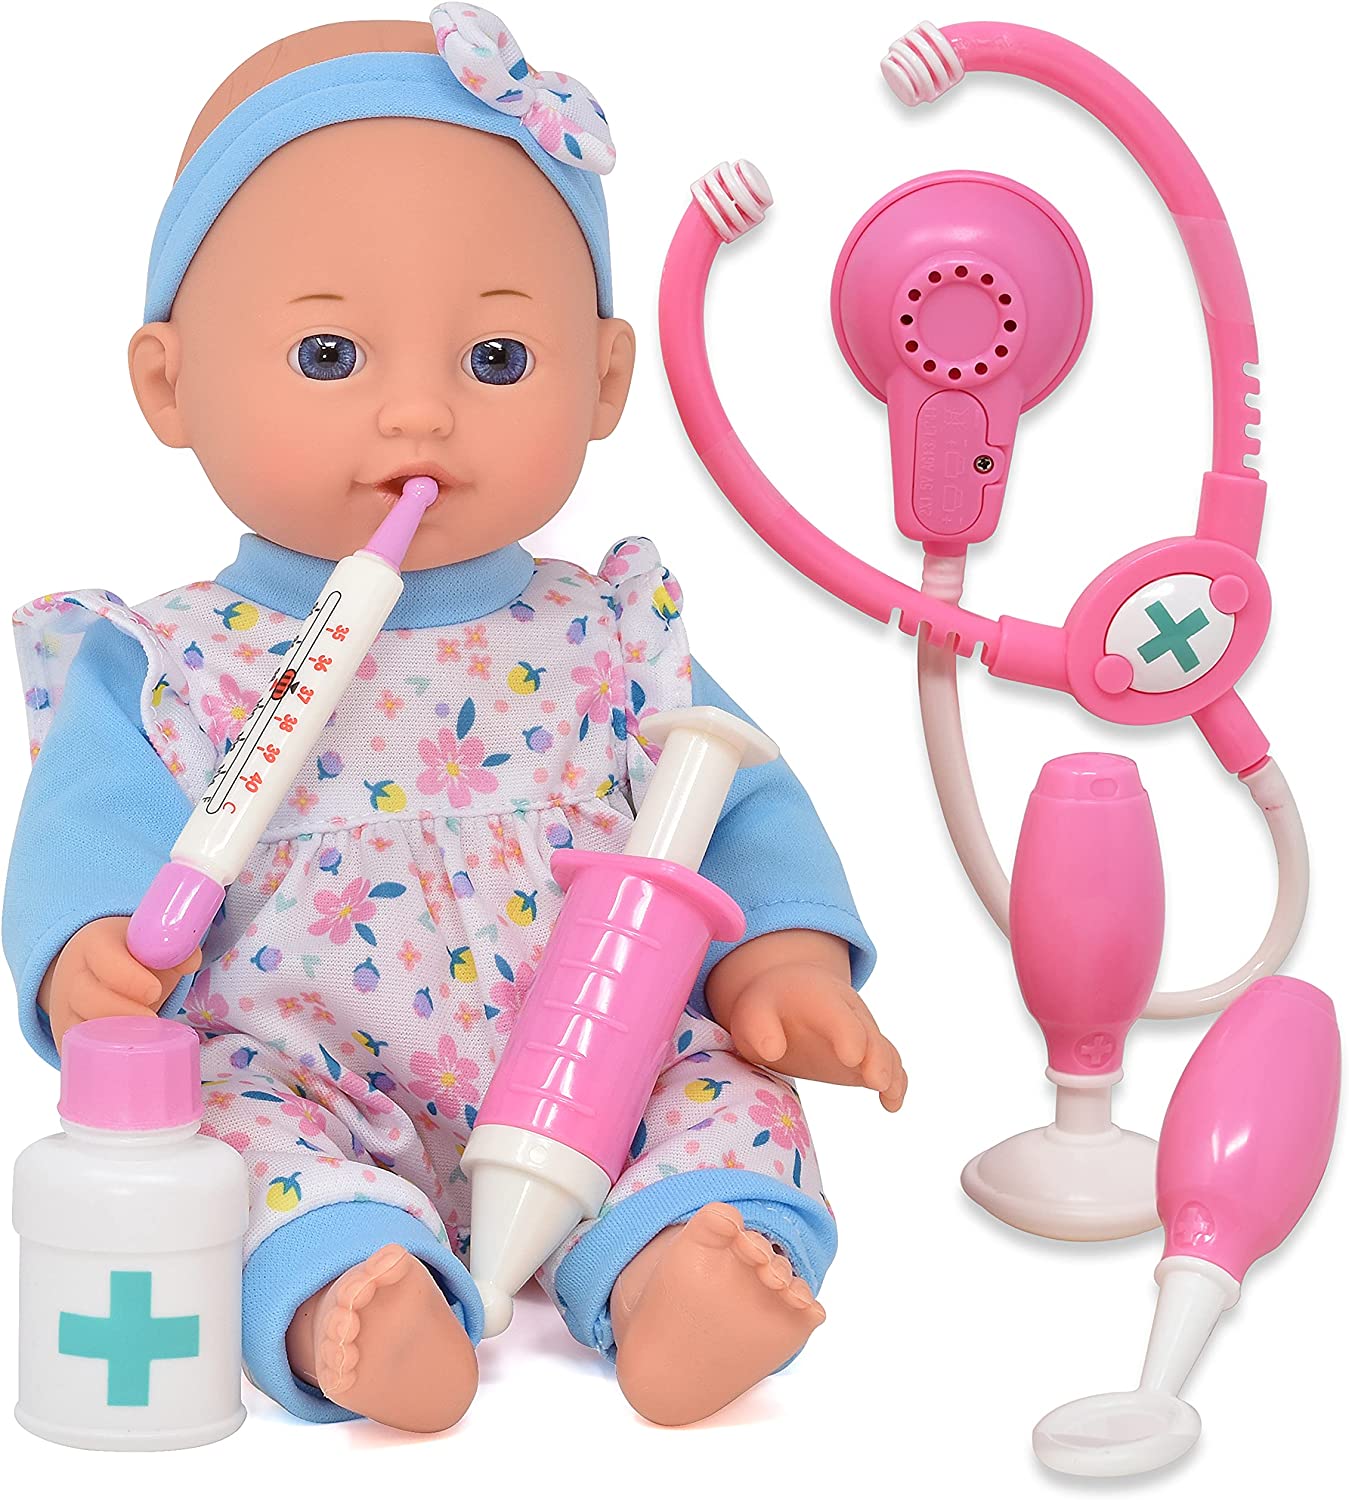 Dolls To Play Pretend Play Medical Doll Set For 2-Year-Old Girls